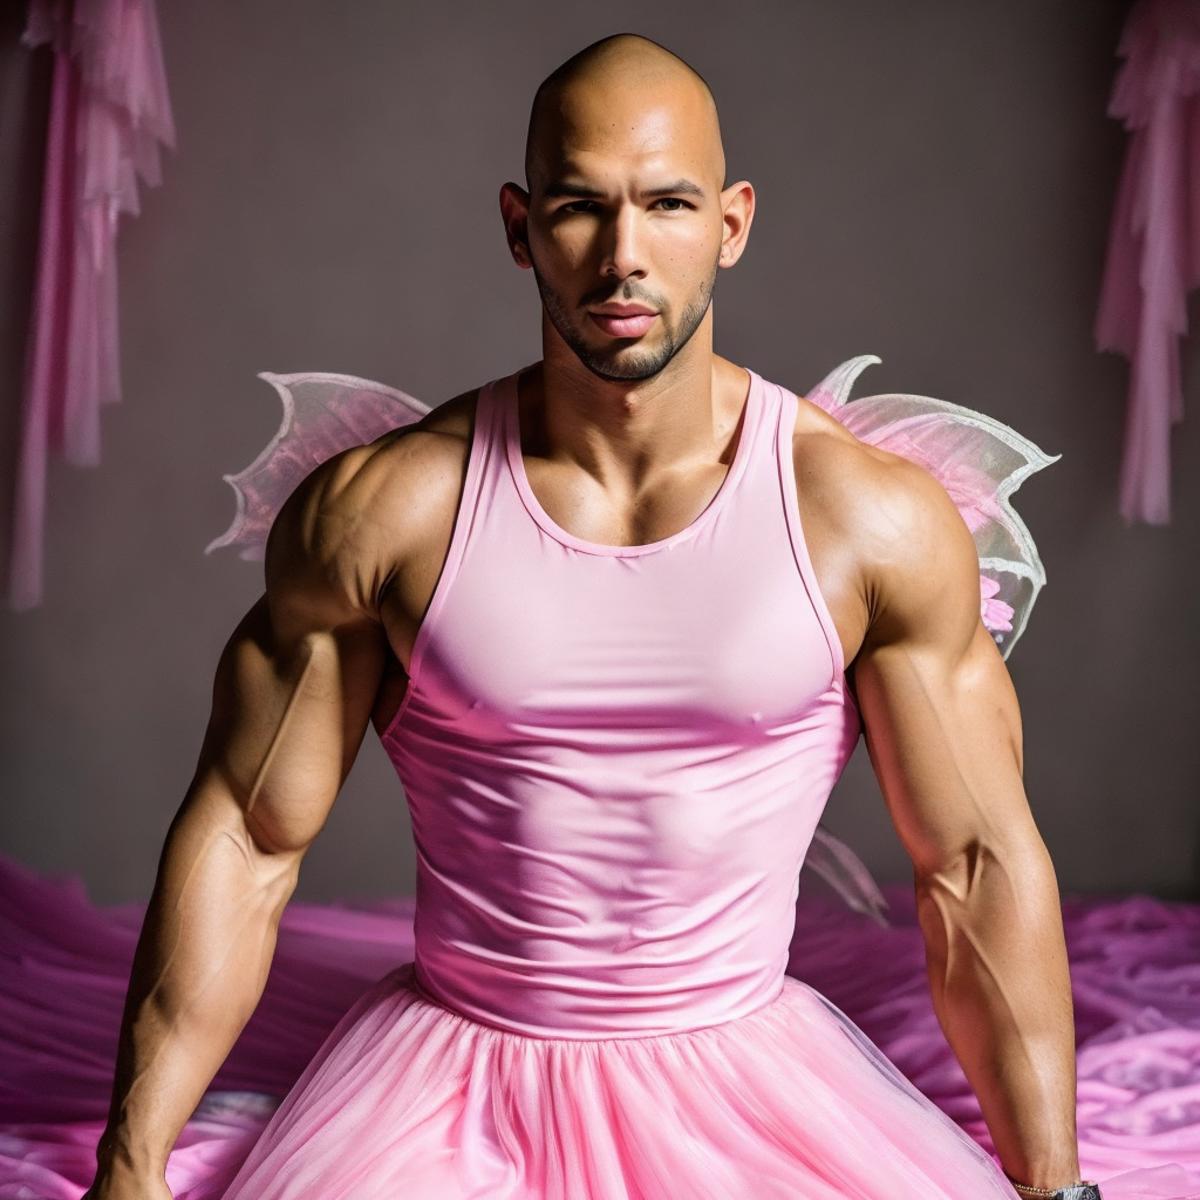 A Muscular Man with Pink Wings and a Pink Dress.